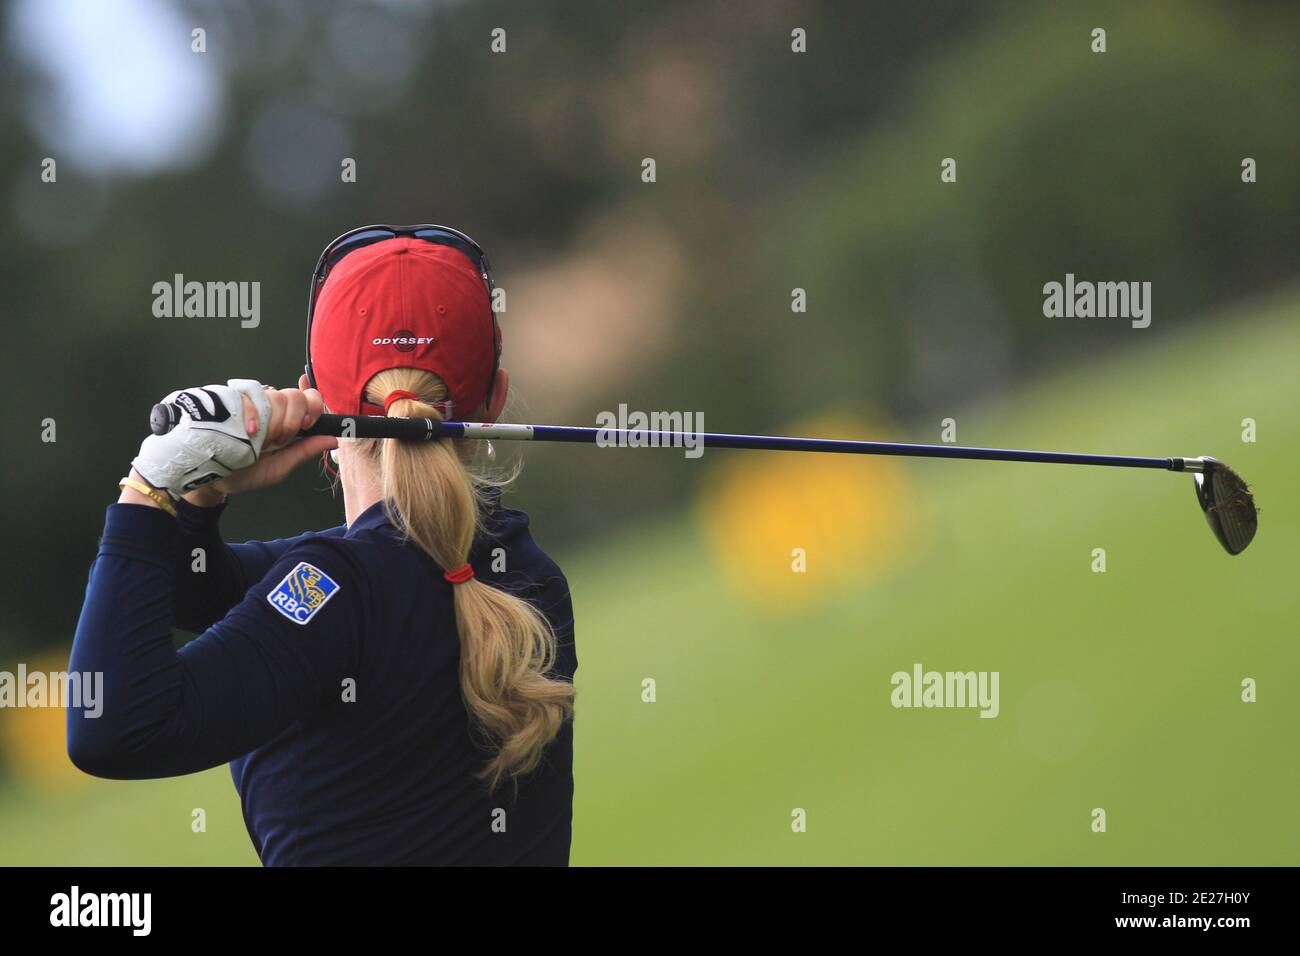 Morgan Pressel of USA is warming up on the practice drills during the 4th round of the Evian Masters, in Evian-les-Bains, French Alps, France on July 24, 2011. Photo by Manuel Blondeau/ABACAPRESS.COM Stock Photo